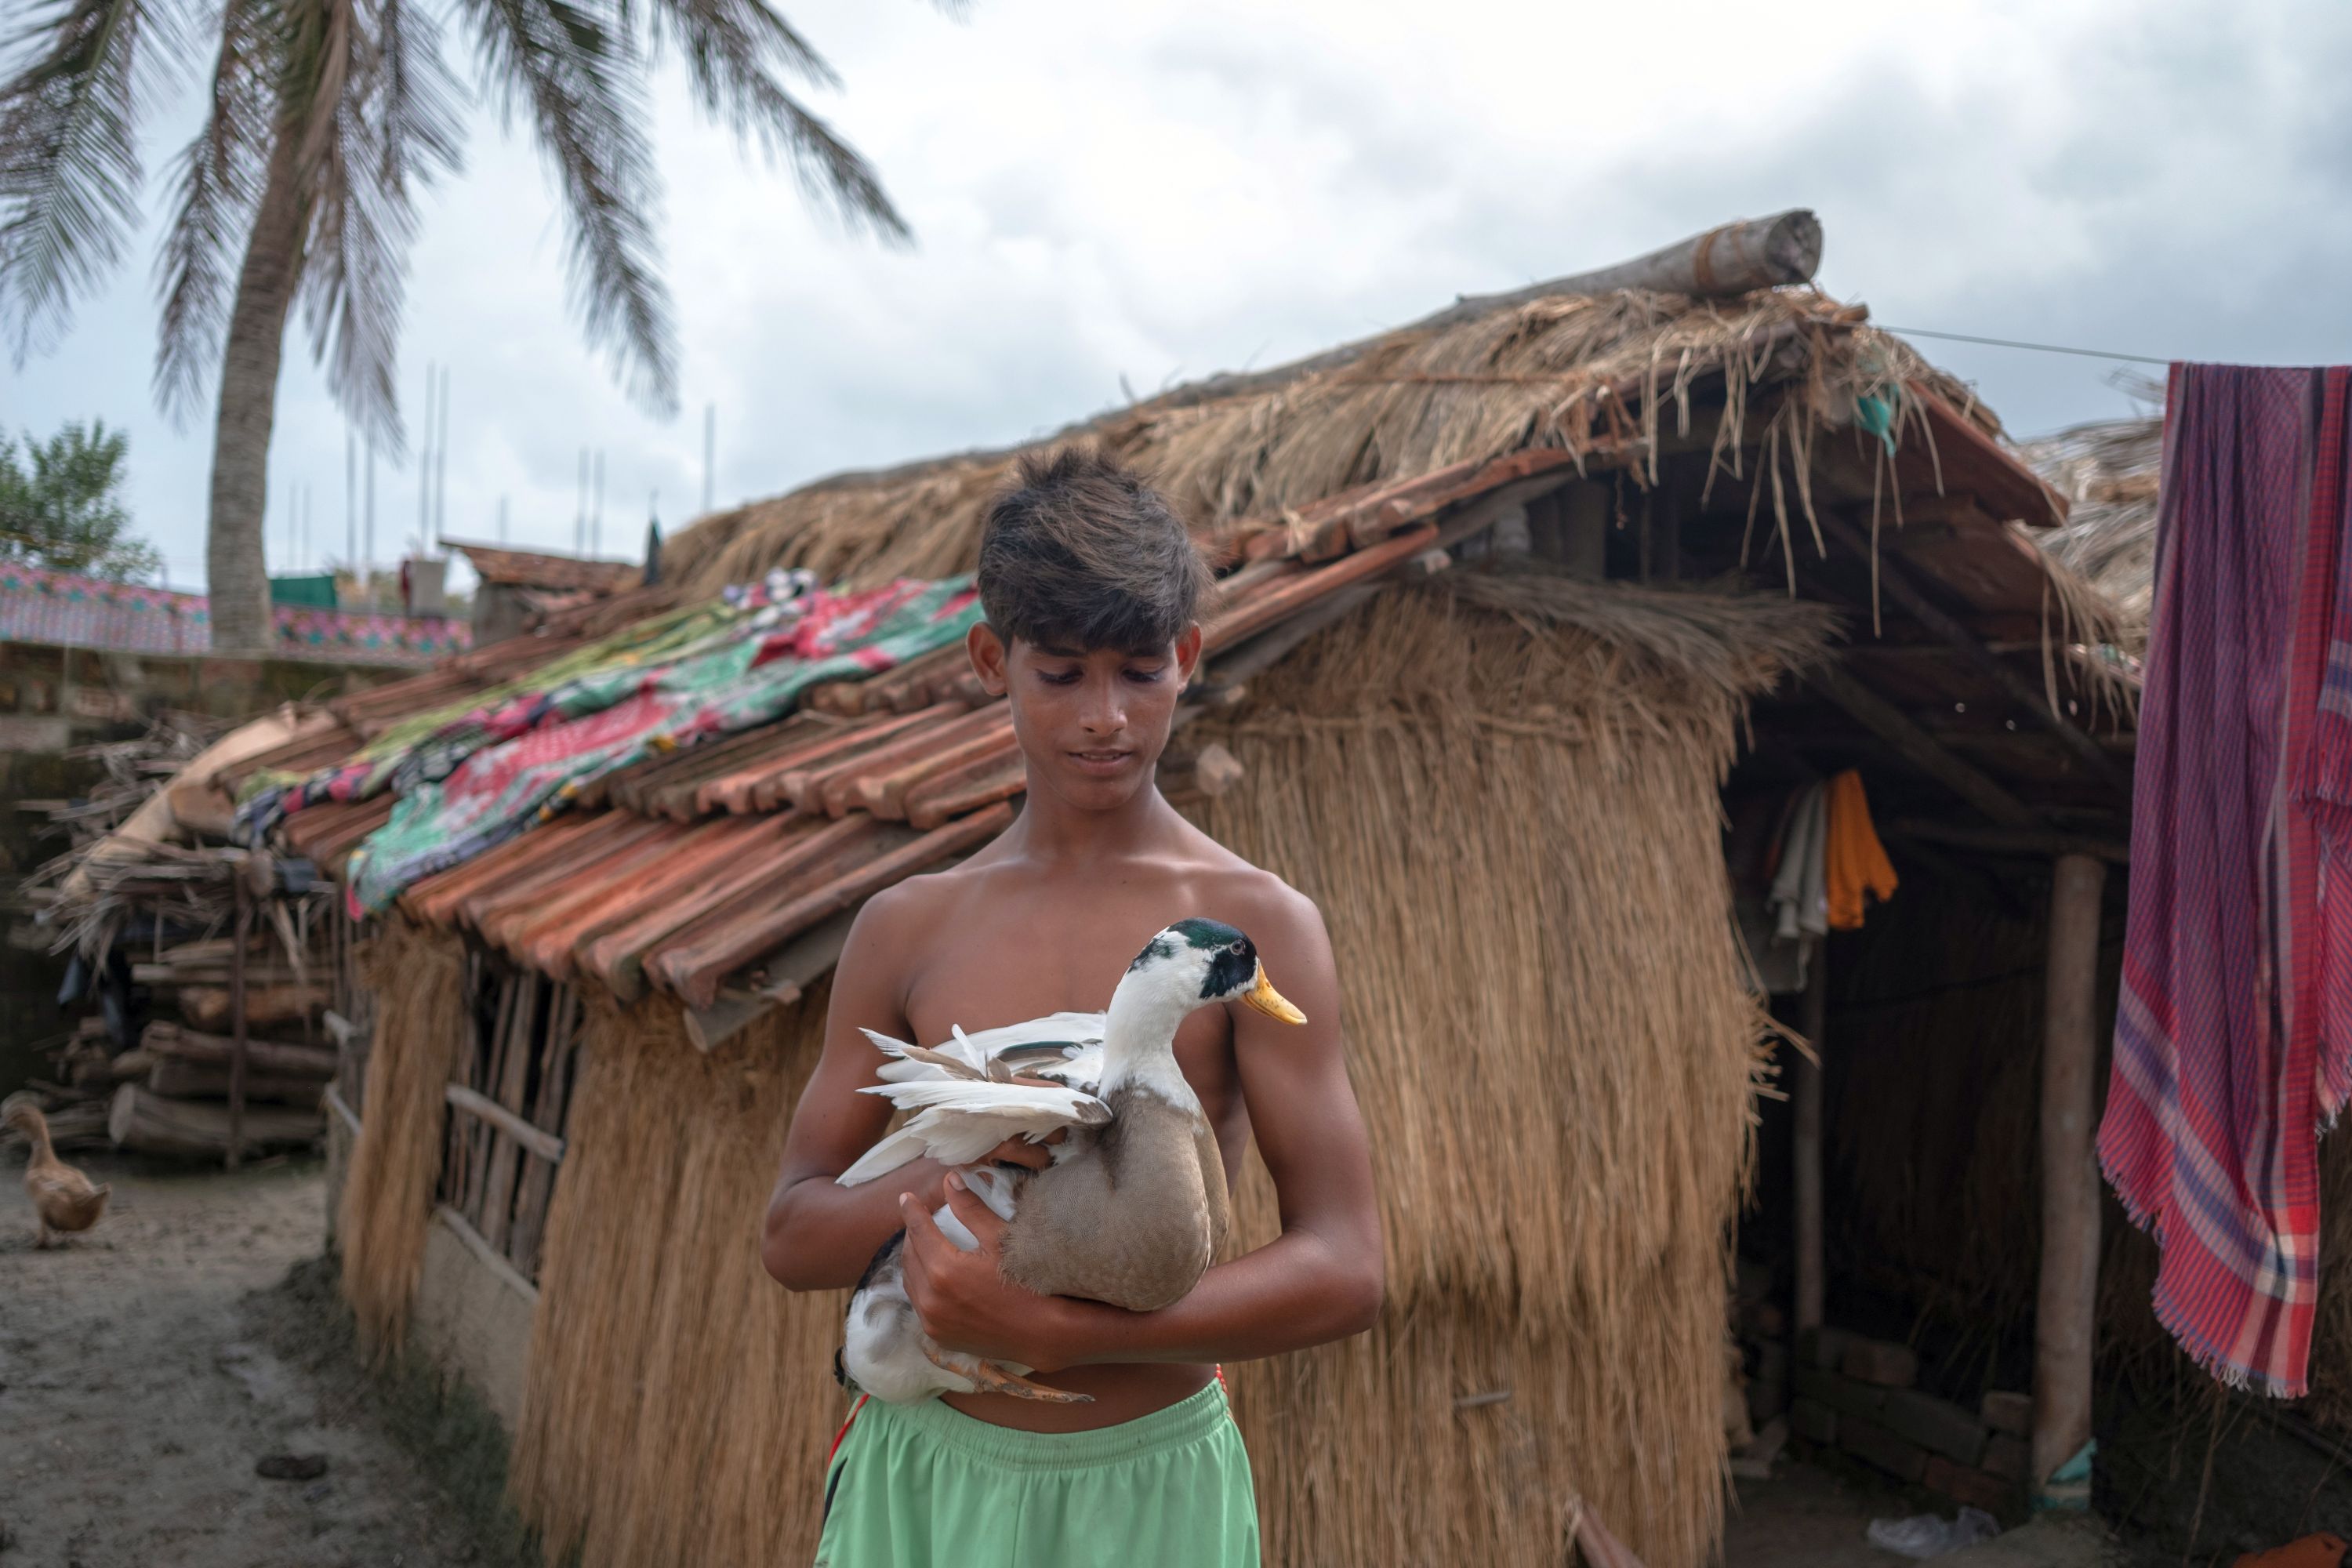 Ahmad Khan stands with his duck. His barn, chicken have all been destroyed and swept away by the cyclone. (Image: WaterAid, Subhrajit Sen)